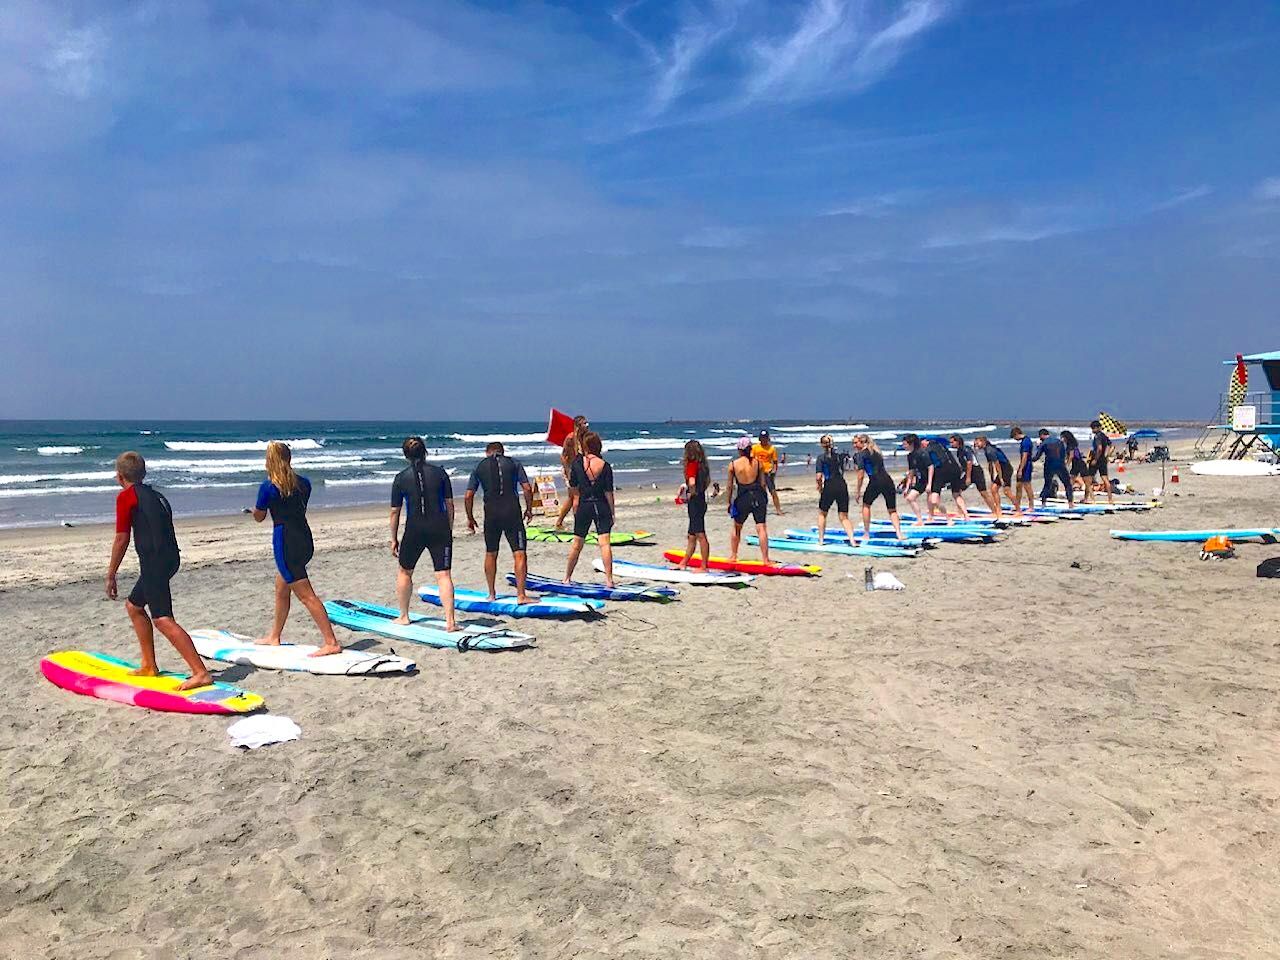 Learning surfers lined up on beach next to surfboards